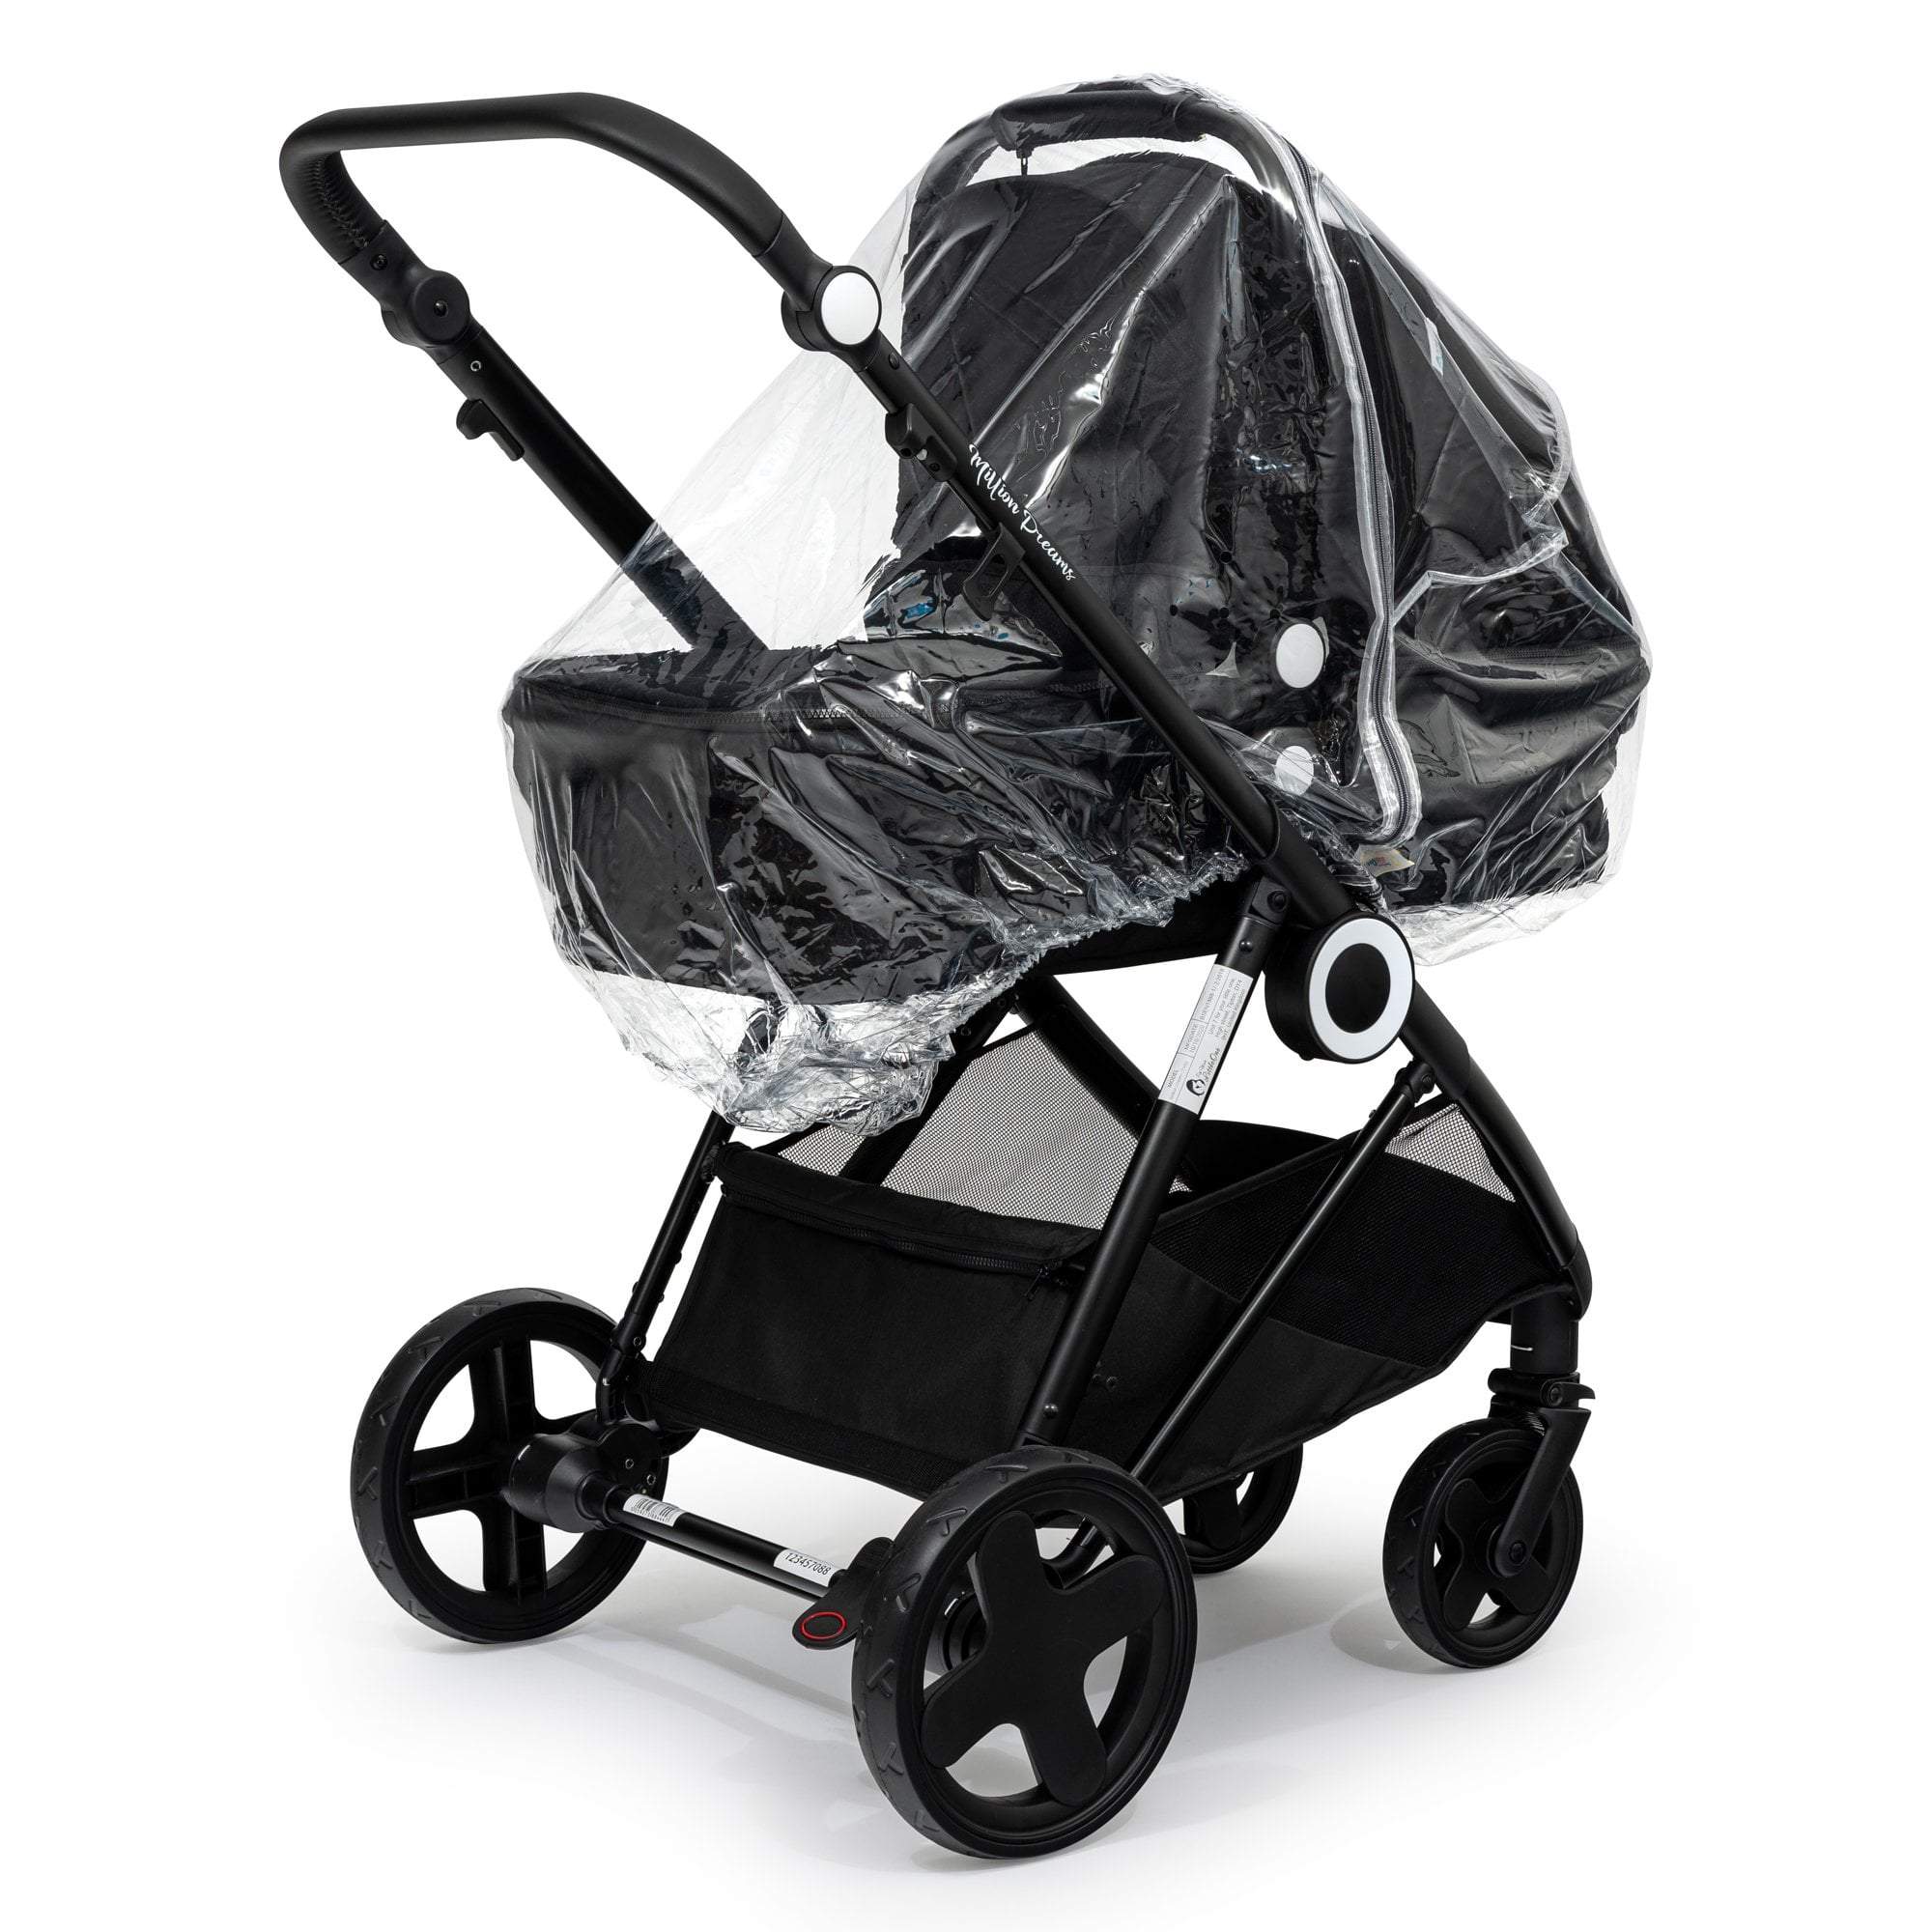 Carrycot Raincover Compatible With Kiddicare - Fits All Models - For Your Little One